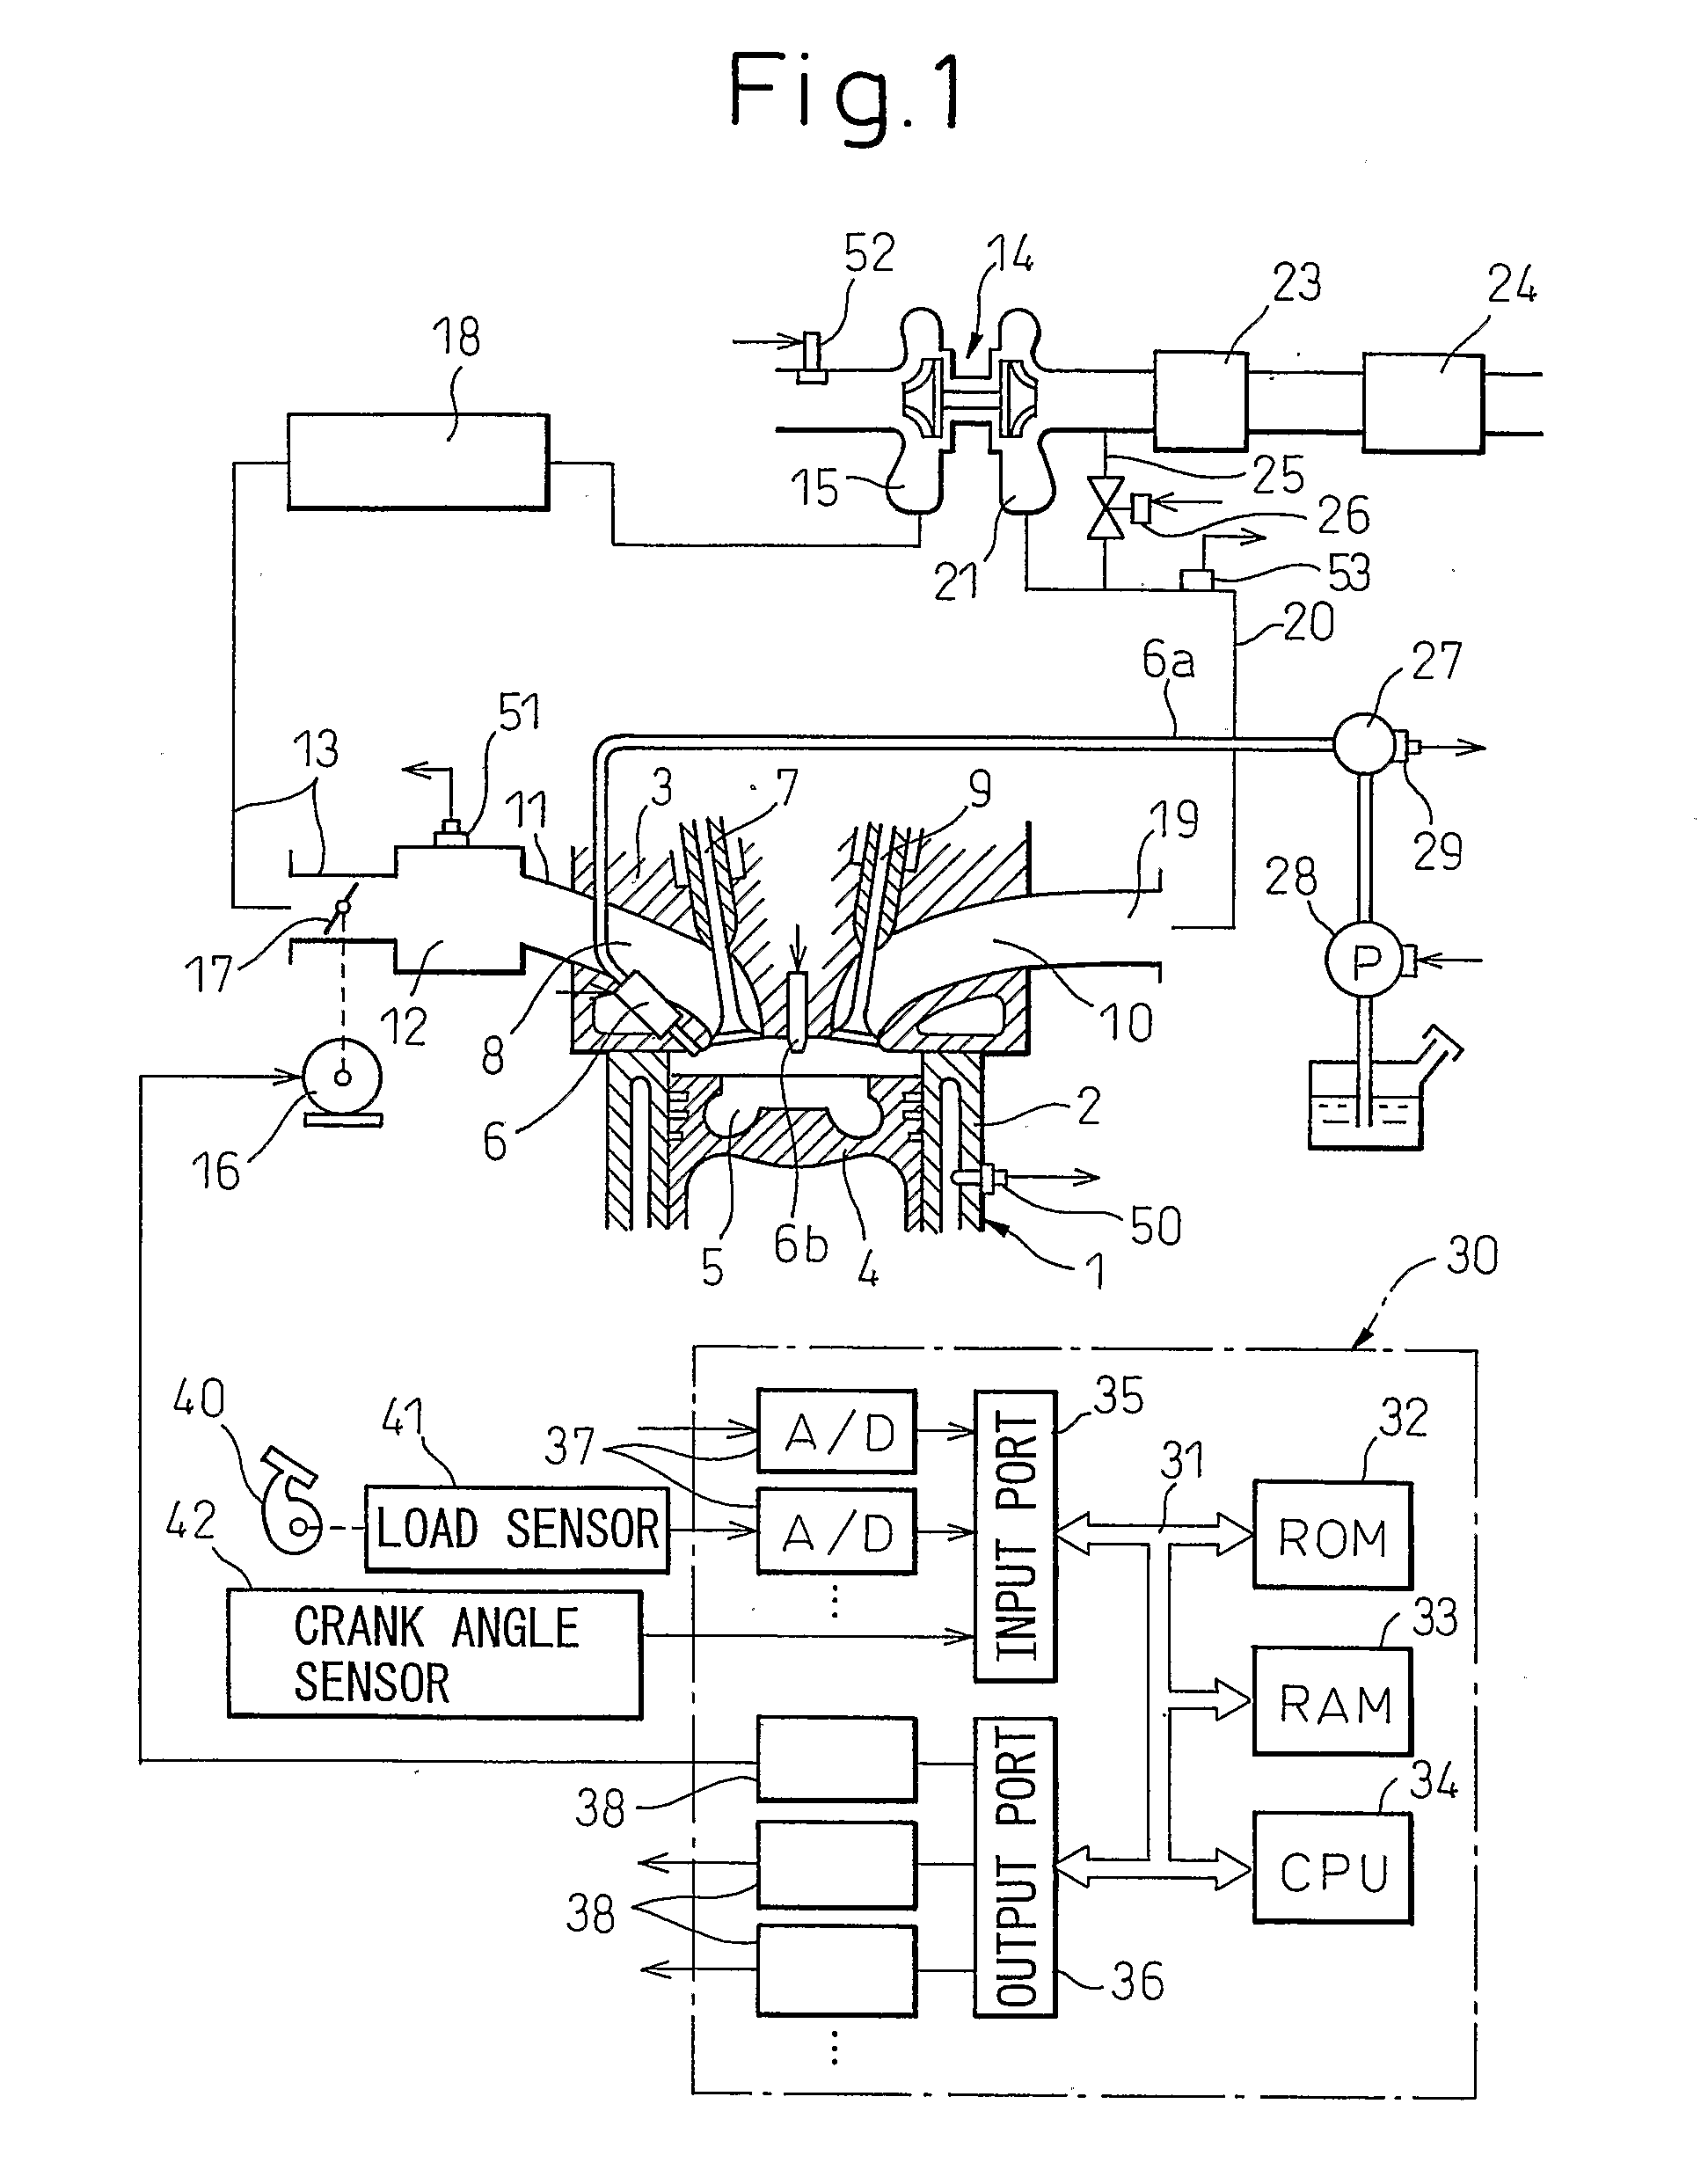 Control System for Supercharged Internal Combustion Engine